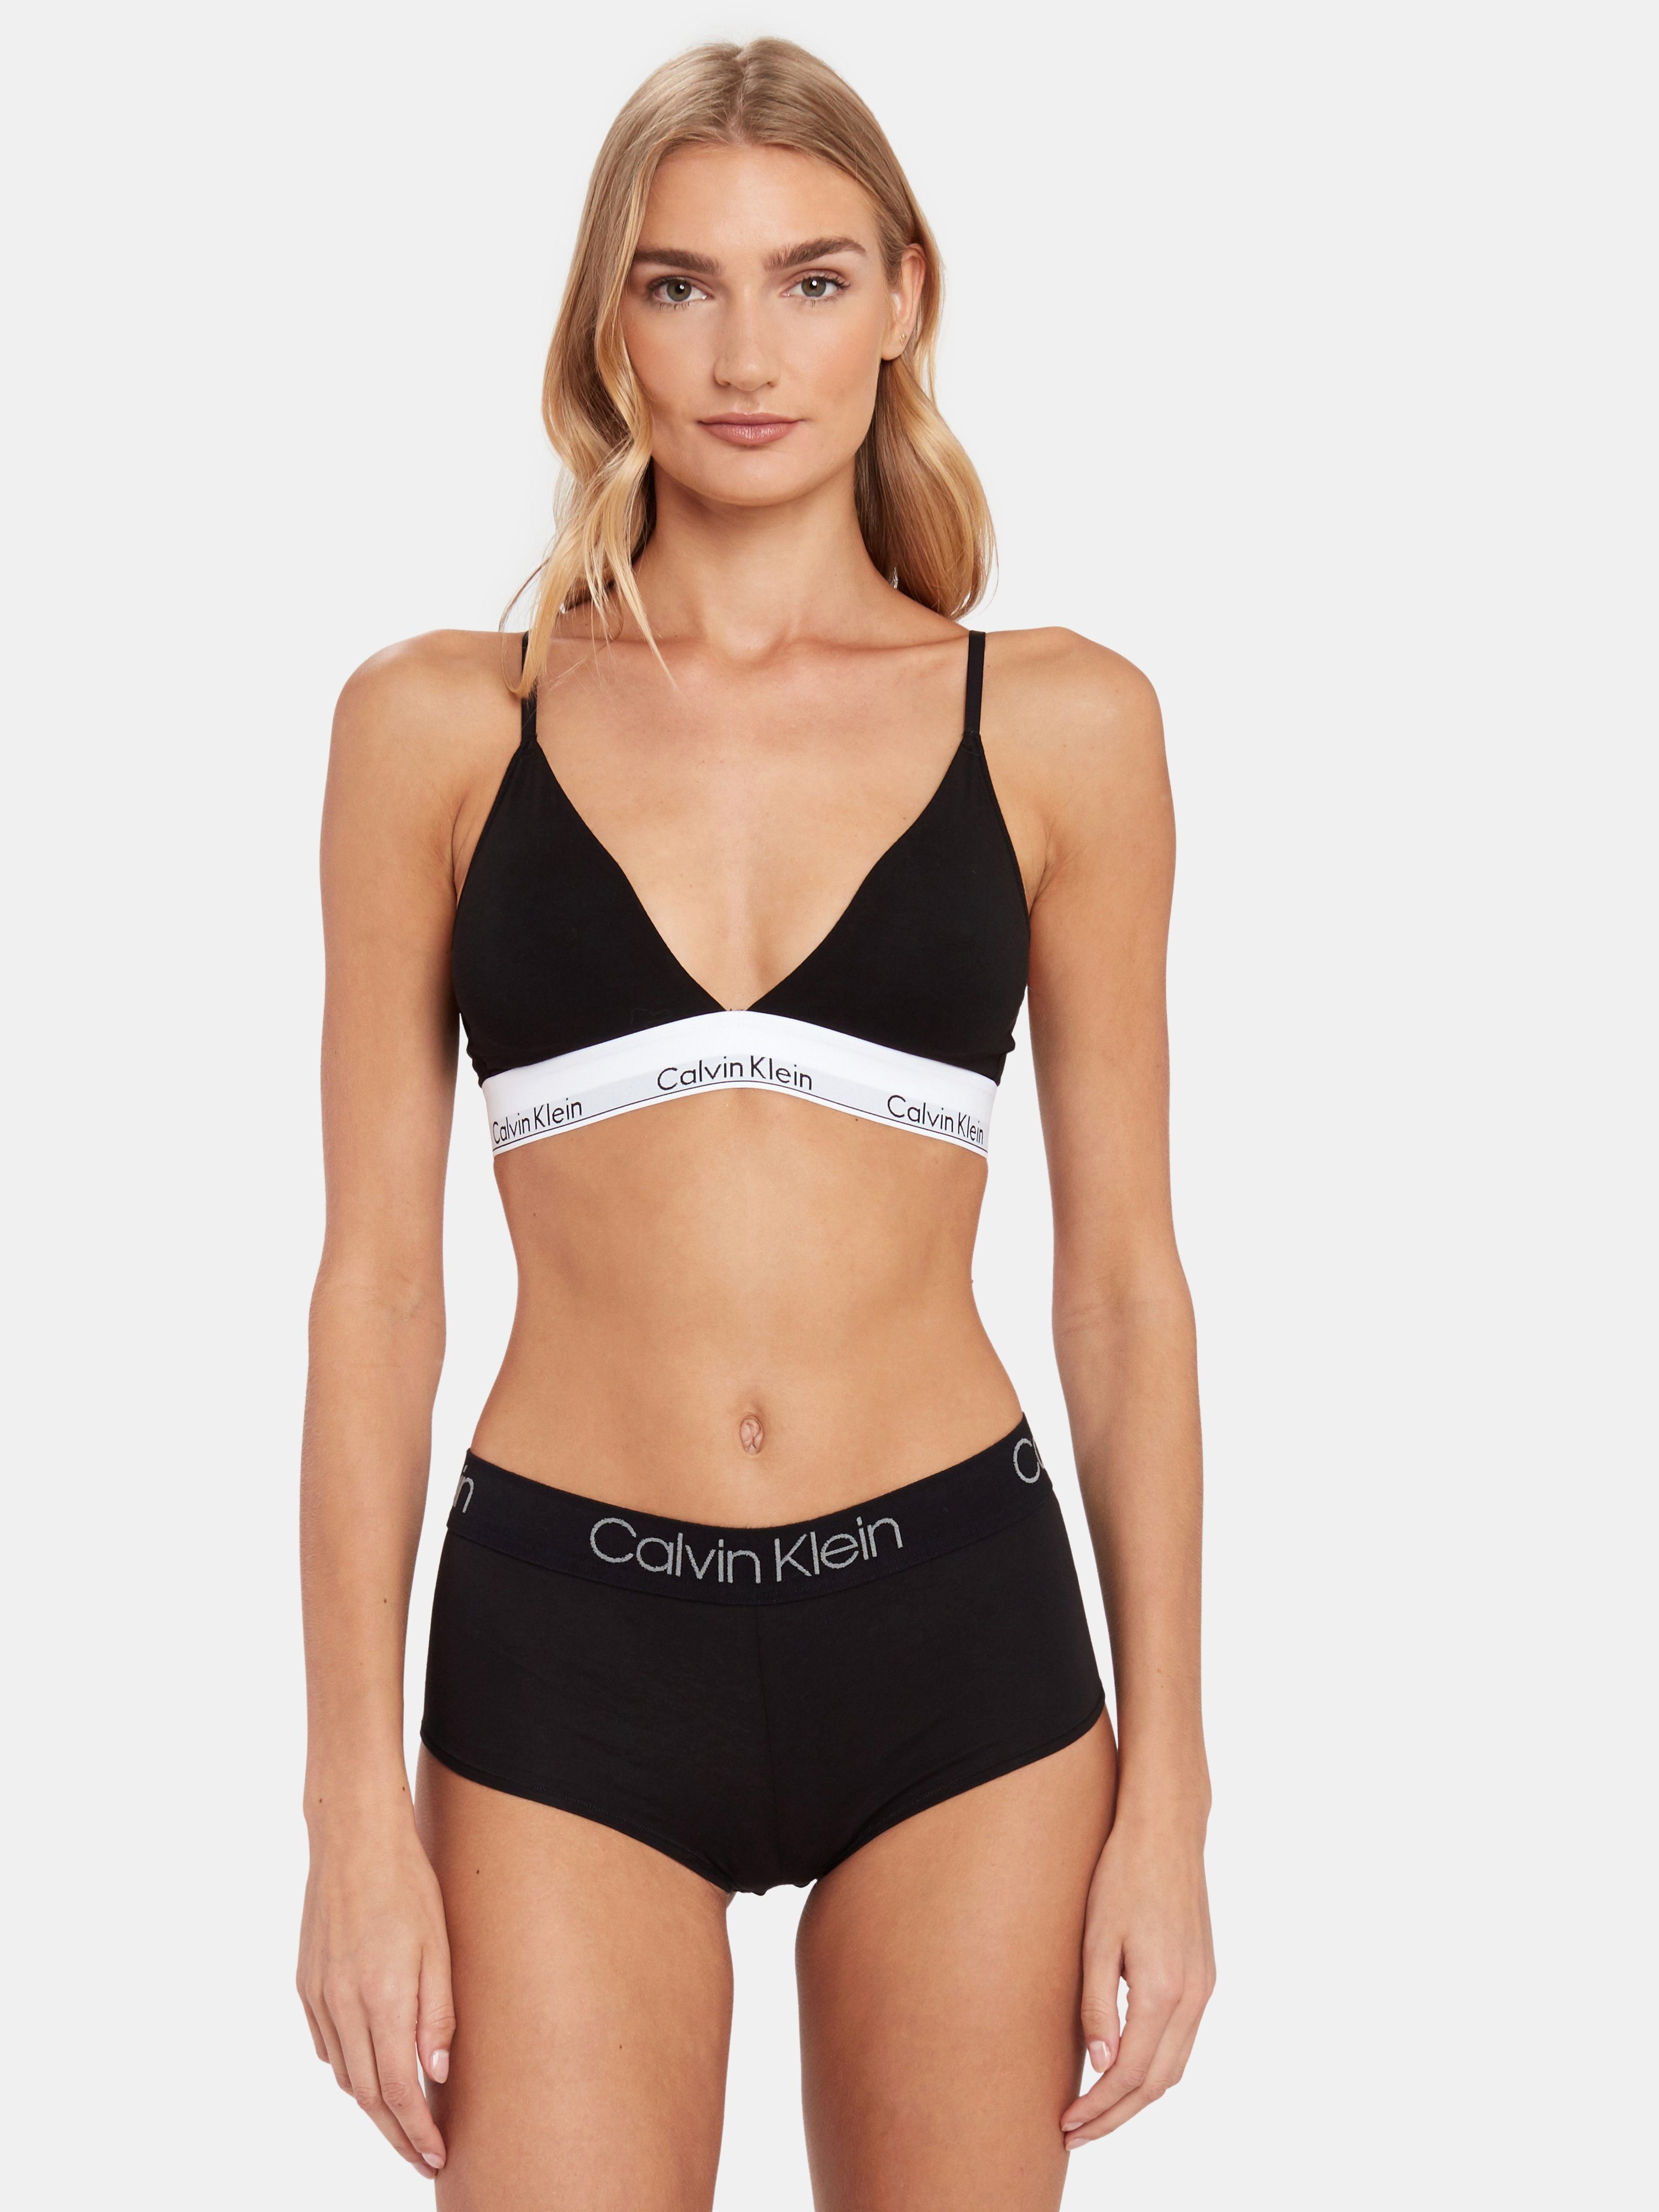 CALVIN KLEIN UNDERWEAR CALVIN KLEIN UNDERWEAR LIGHTLY LINED TRIANGLE BRALETTE